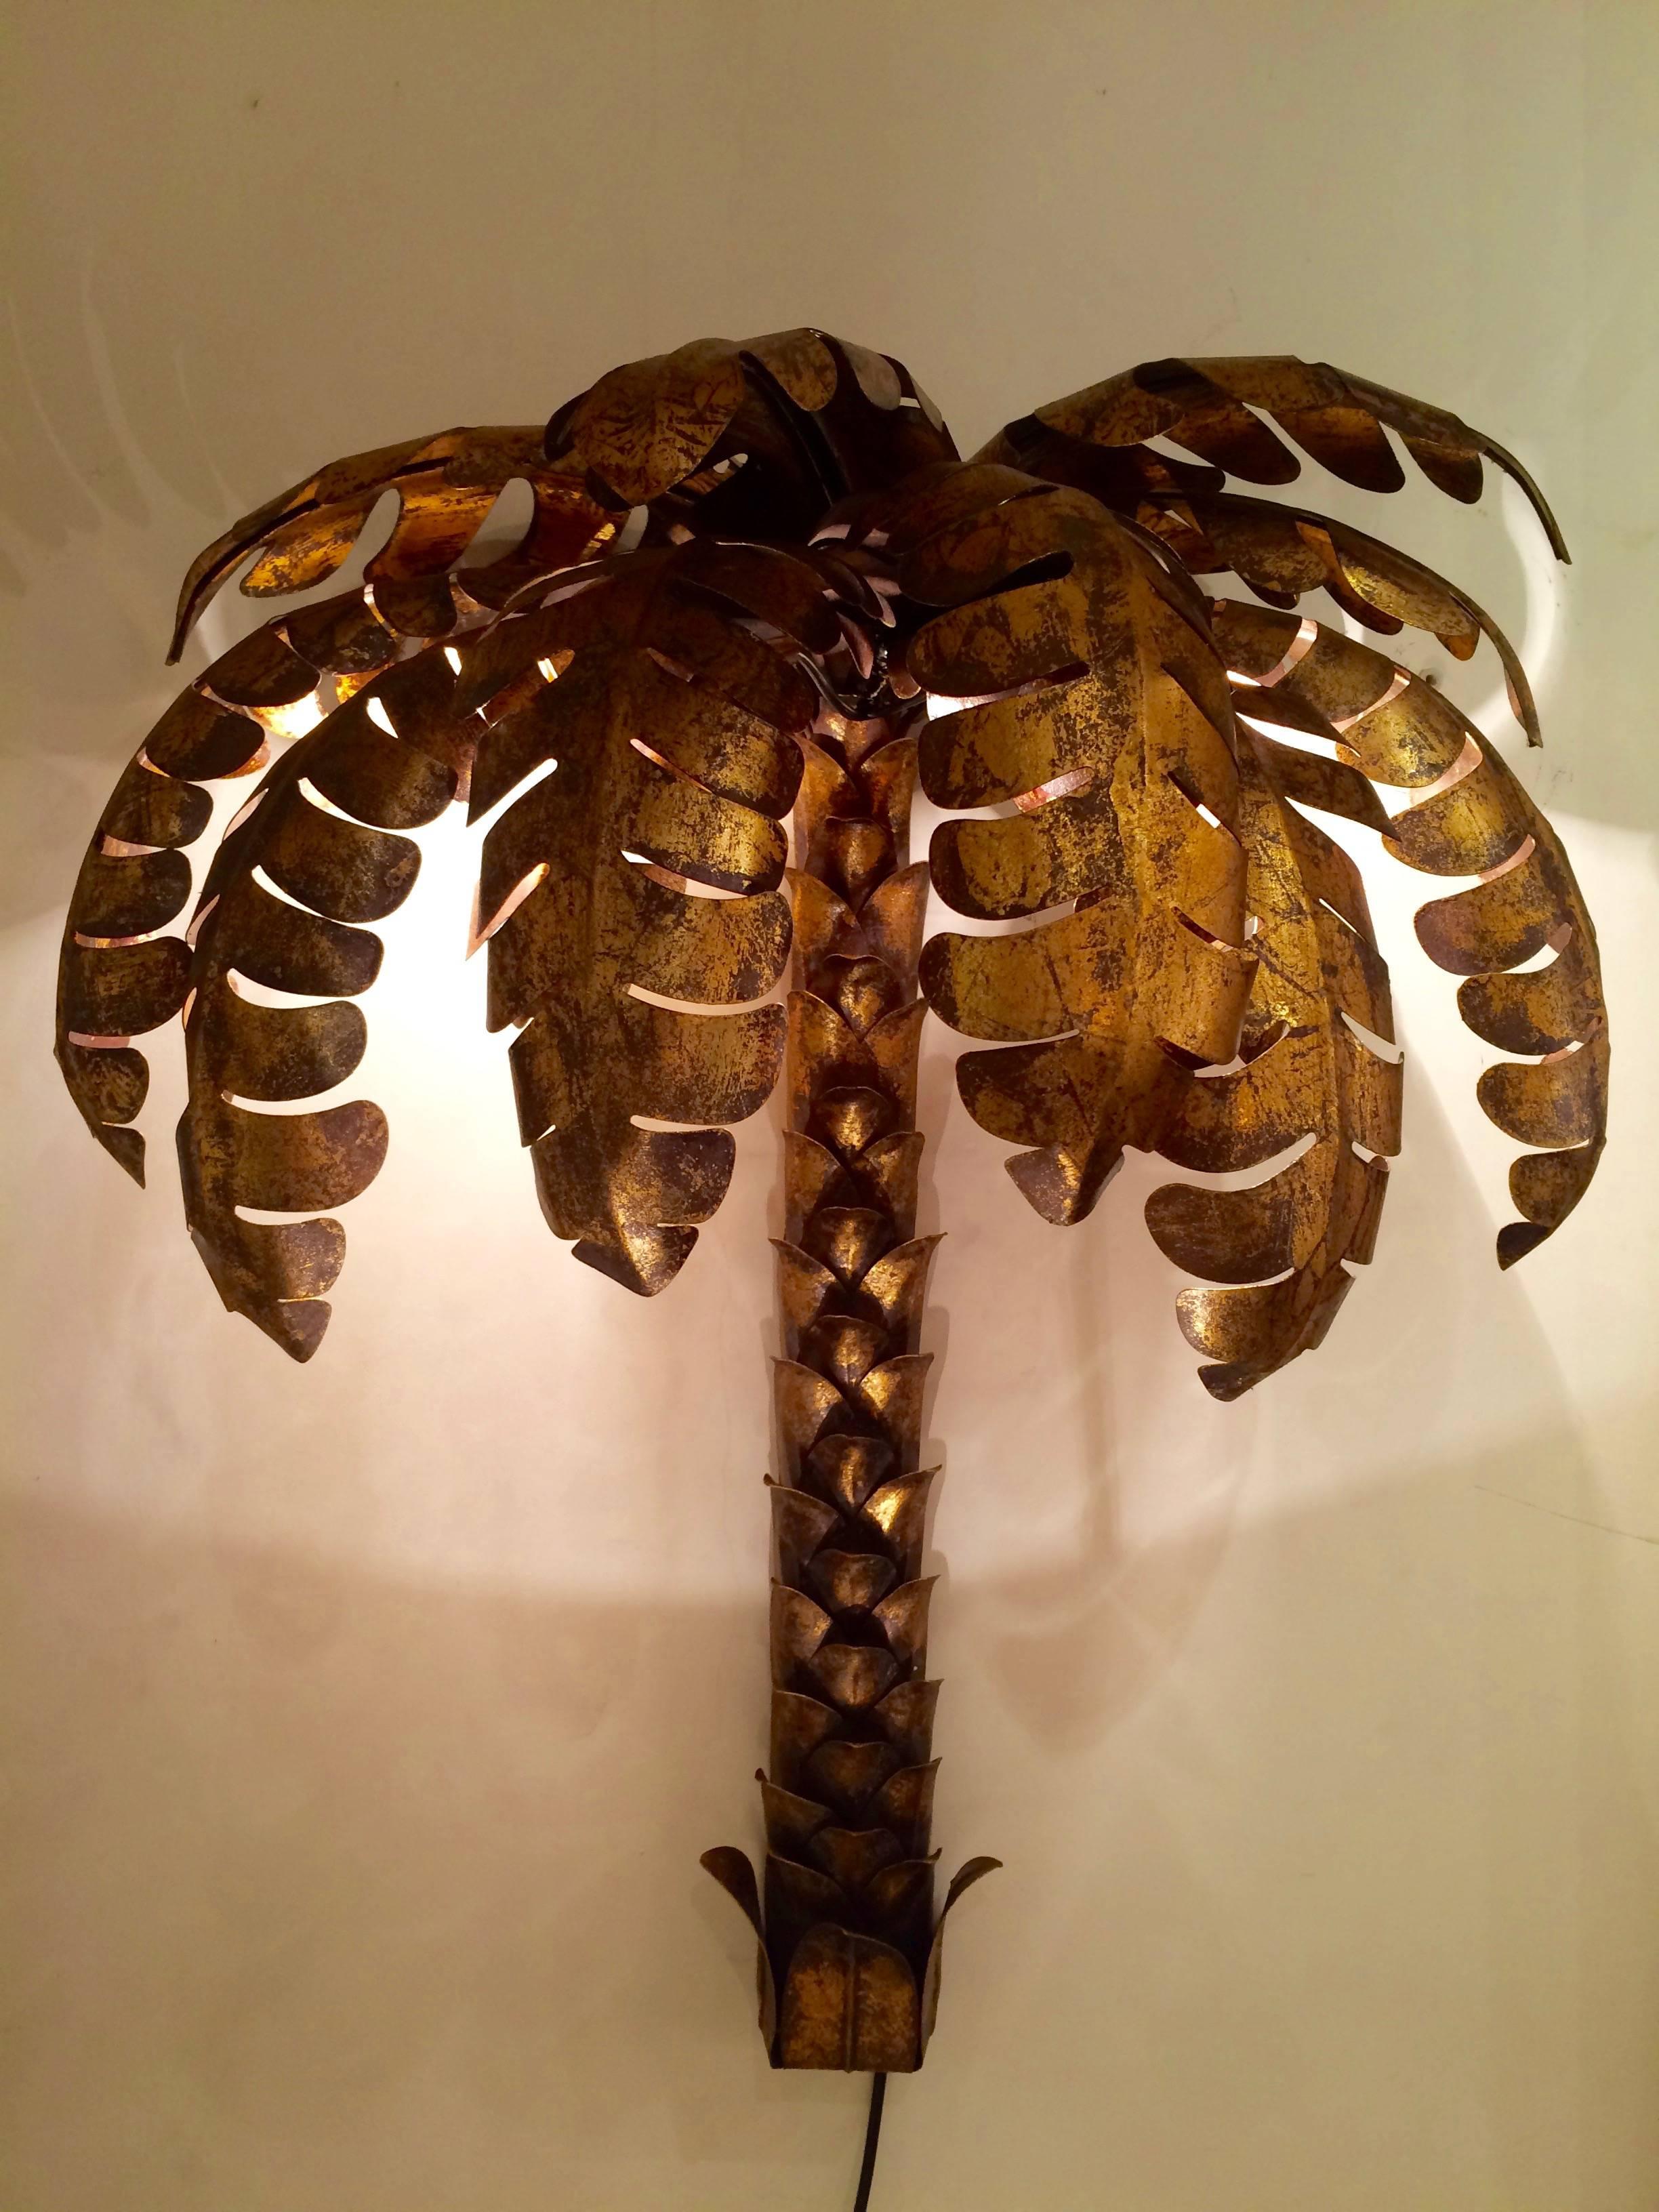 Very decorative set of palm tree sconces in the style of Maison Jansen, Paris
in wrought iron with a gold leaf patine.
We have eight items and they are sold by set of two.
The price indicated is for one sconce only.